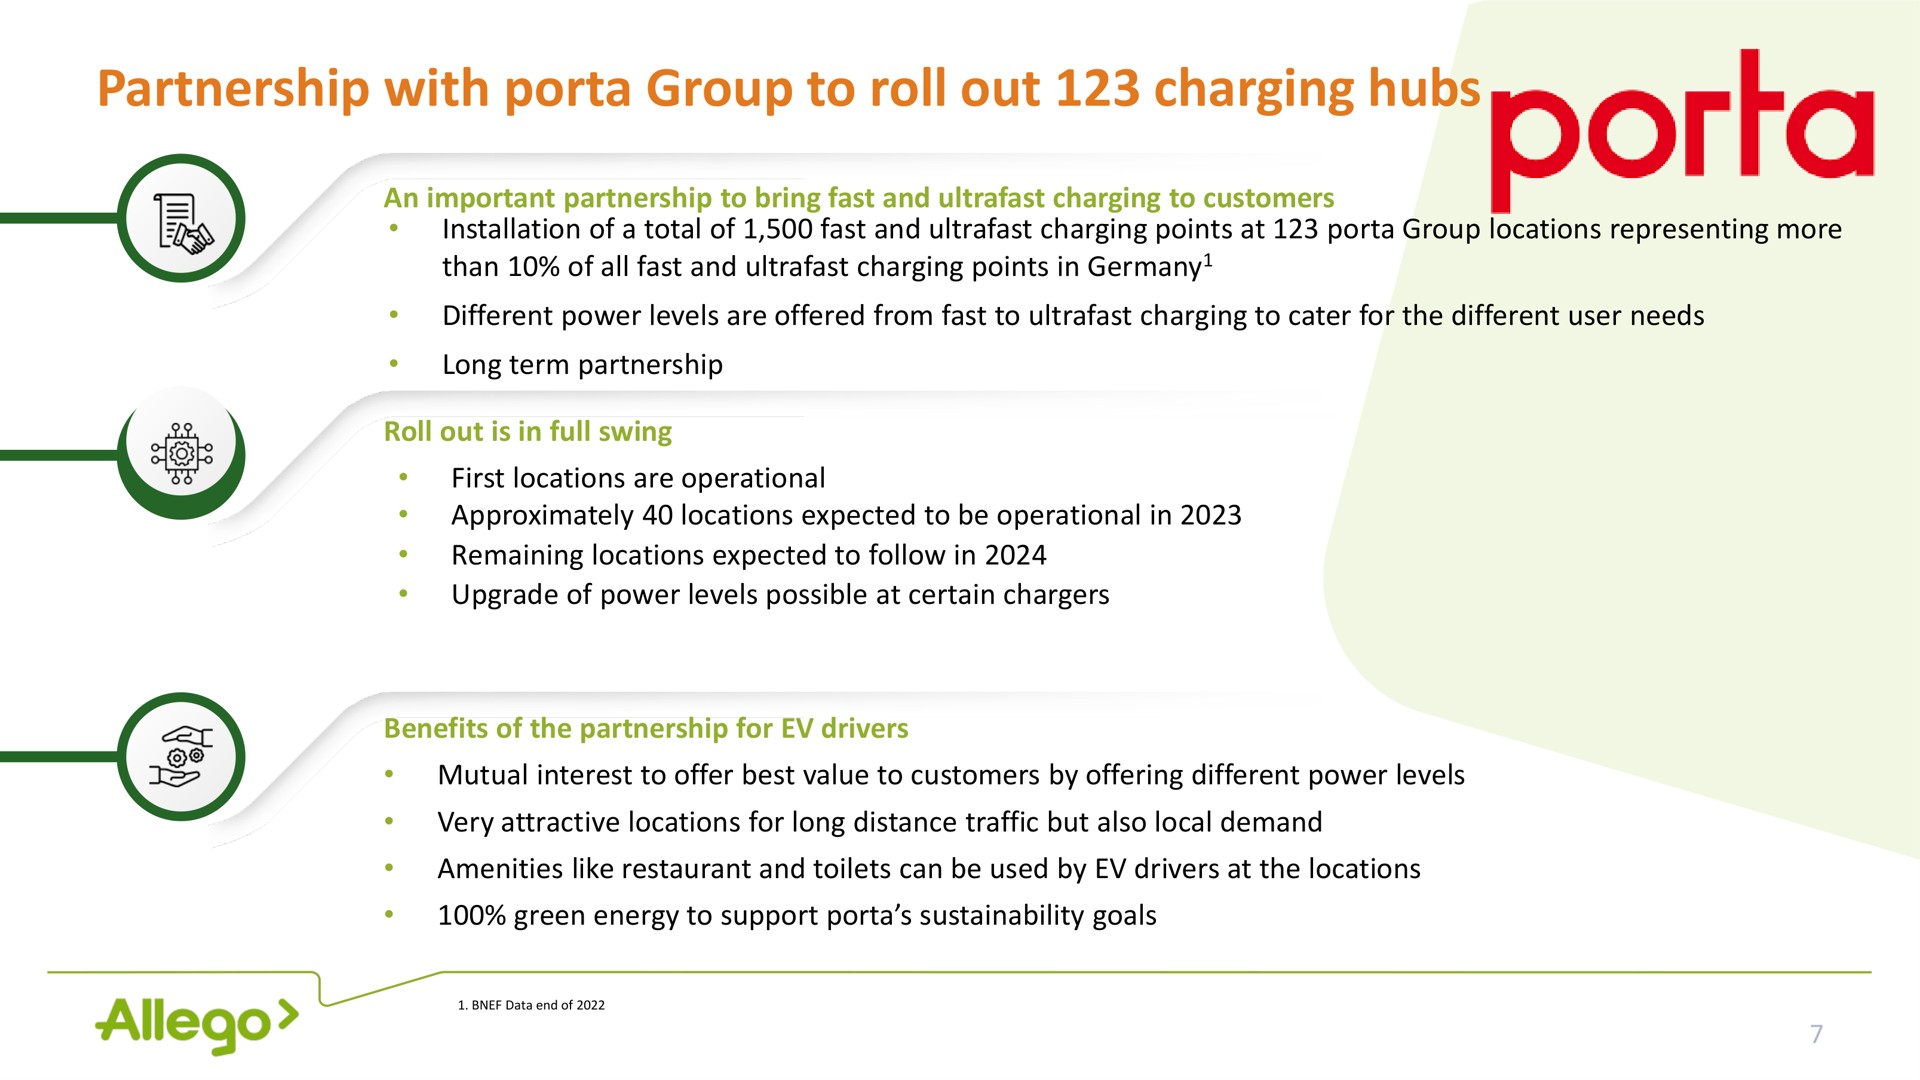 partnership with porta group to roll out charging hubs | Allego